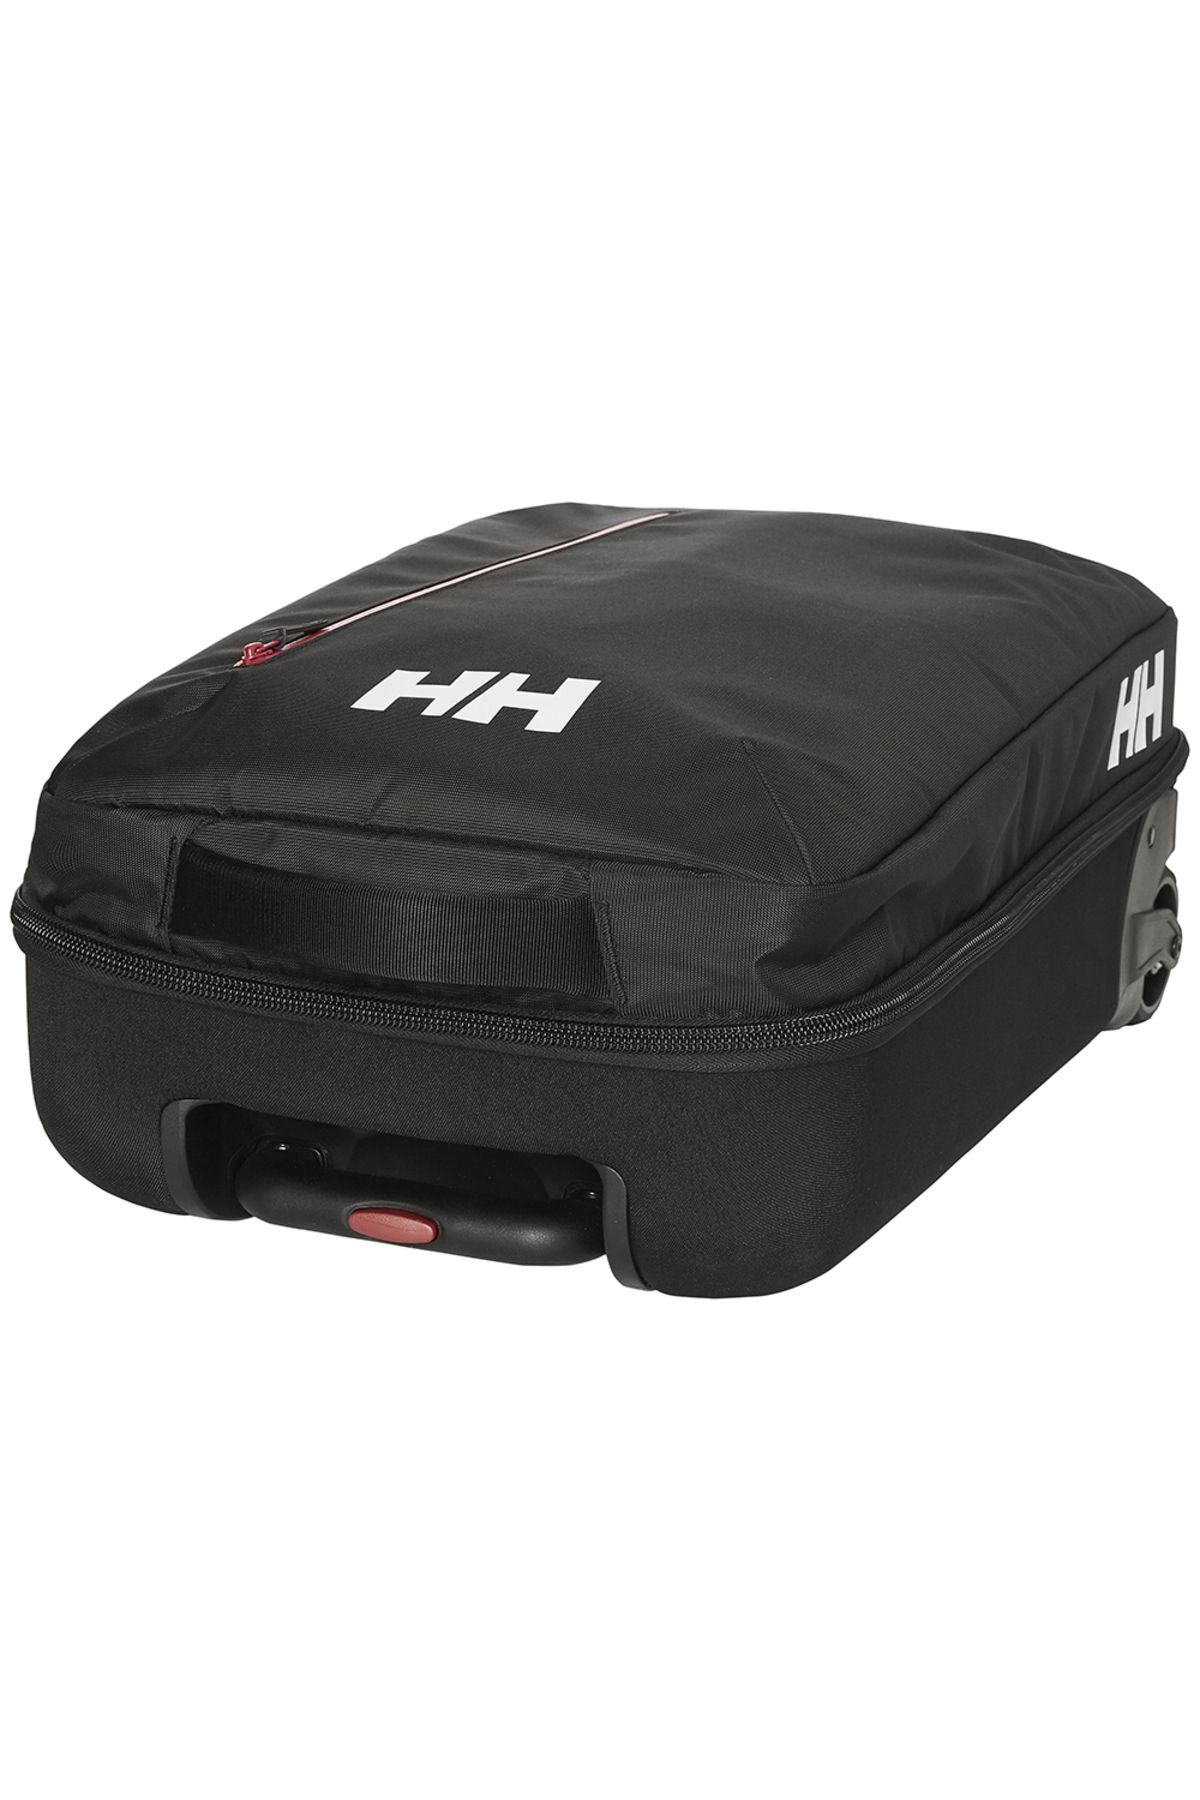 Helly Hansen Sport Exp. Trolley Carry On